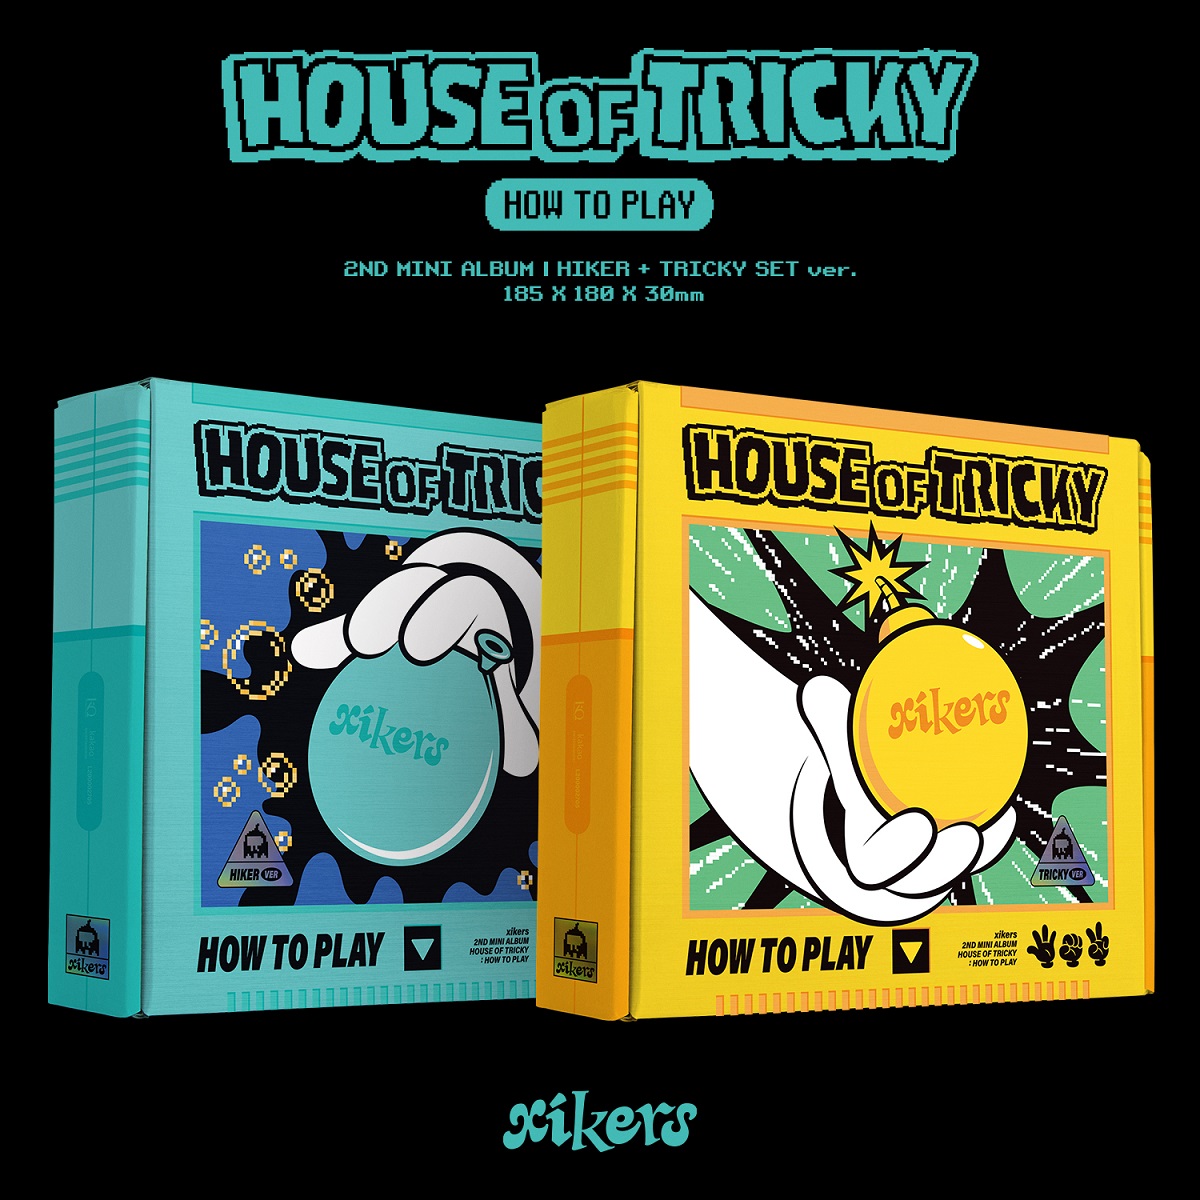 [2CD SET] xikers - 2ND MINI ALBUM [HOUSE OF TRICKY : HOW TO PLAY] (HIKER Ver. + TRICKY Ver.)